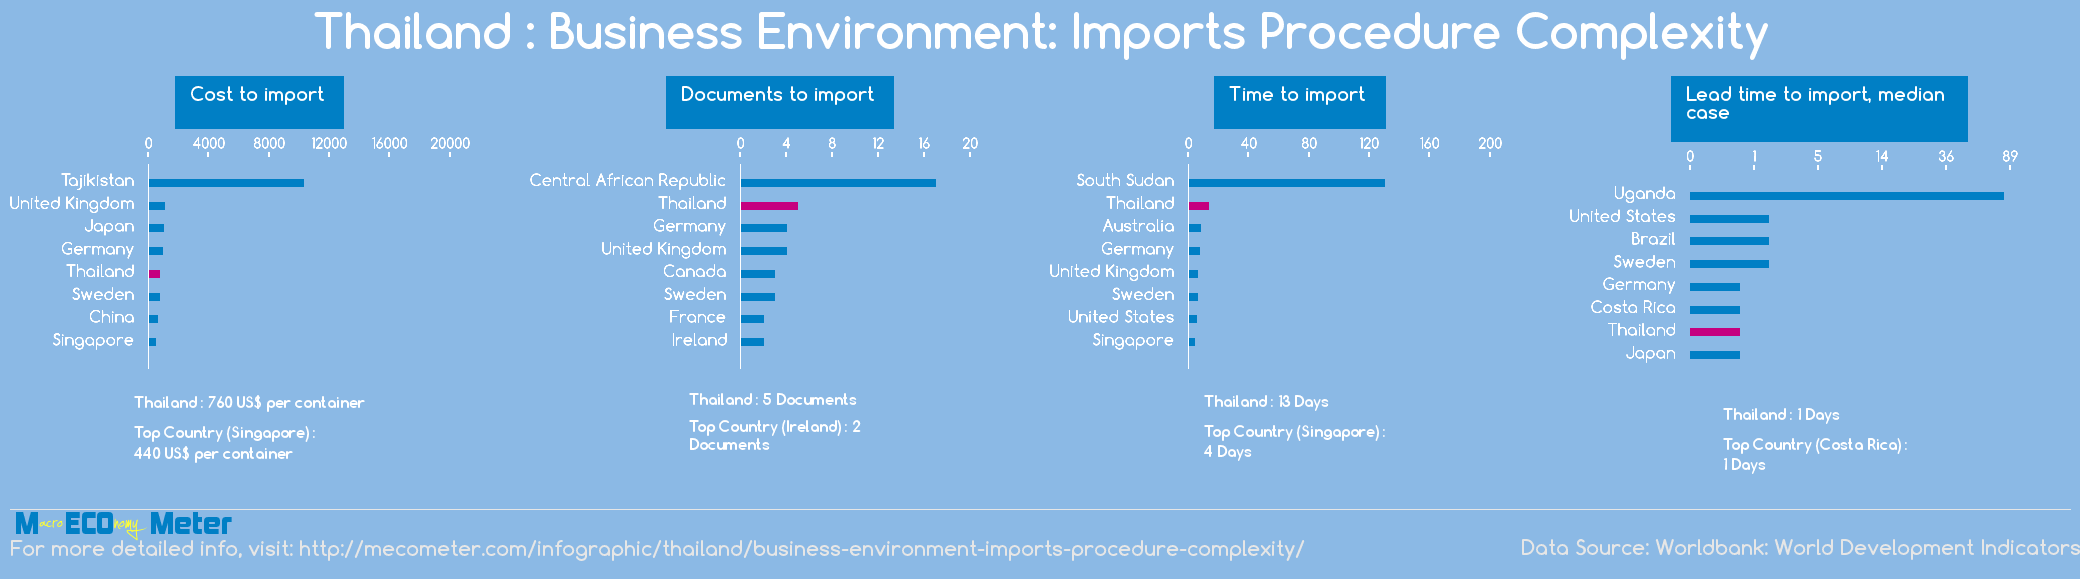 Thailand : Business Environment: Imports Procedure Complexity